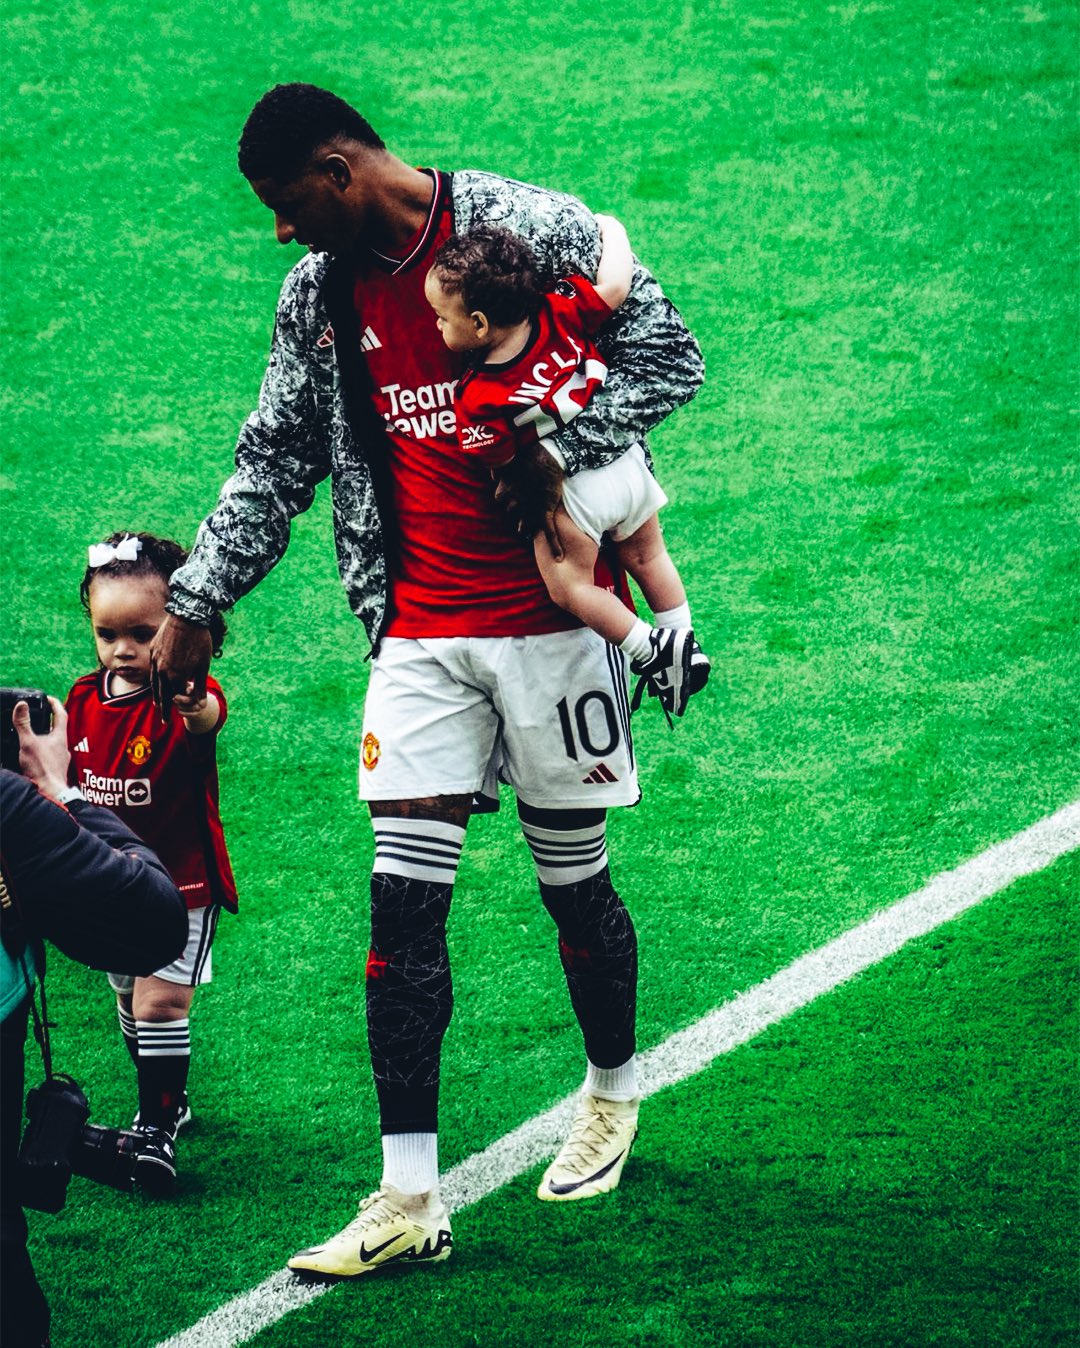 Marcus Rashford with his "niece and nephew" at Old Trafford, Manchester United homeground